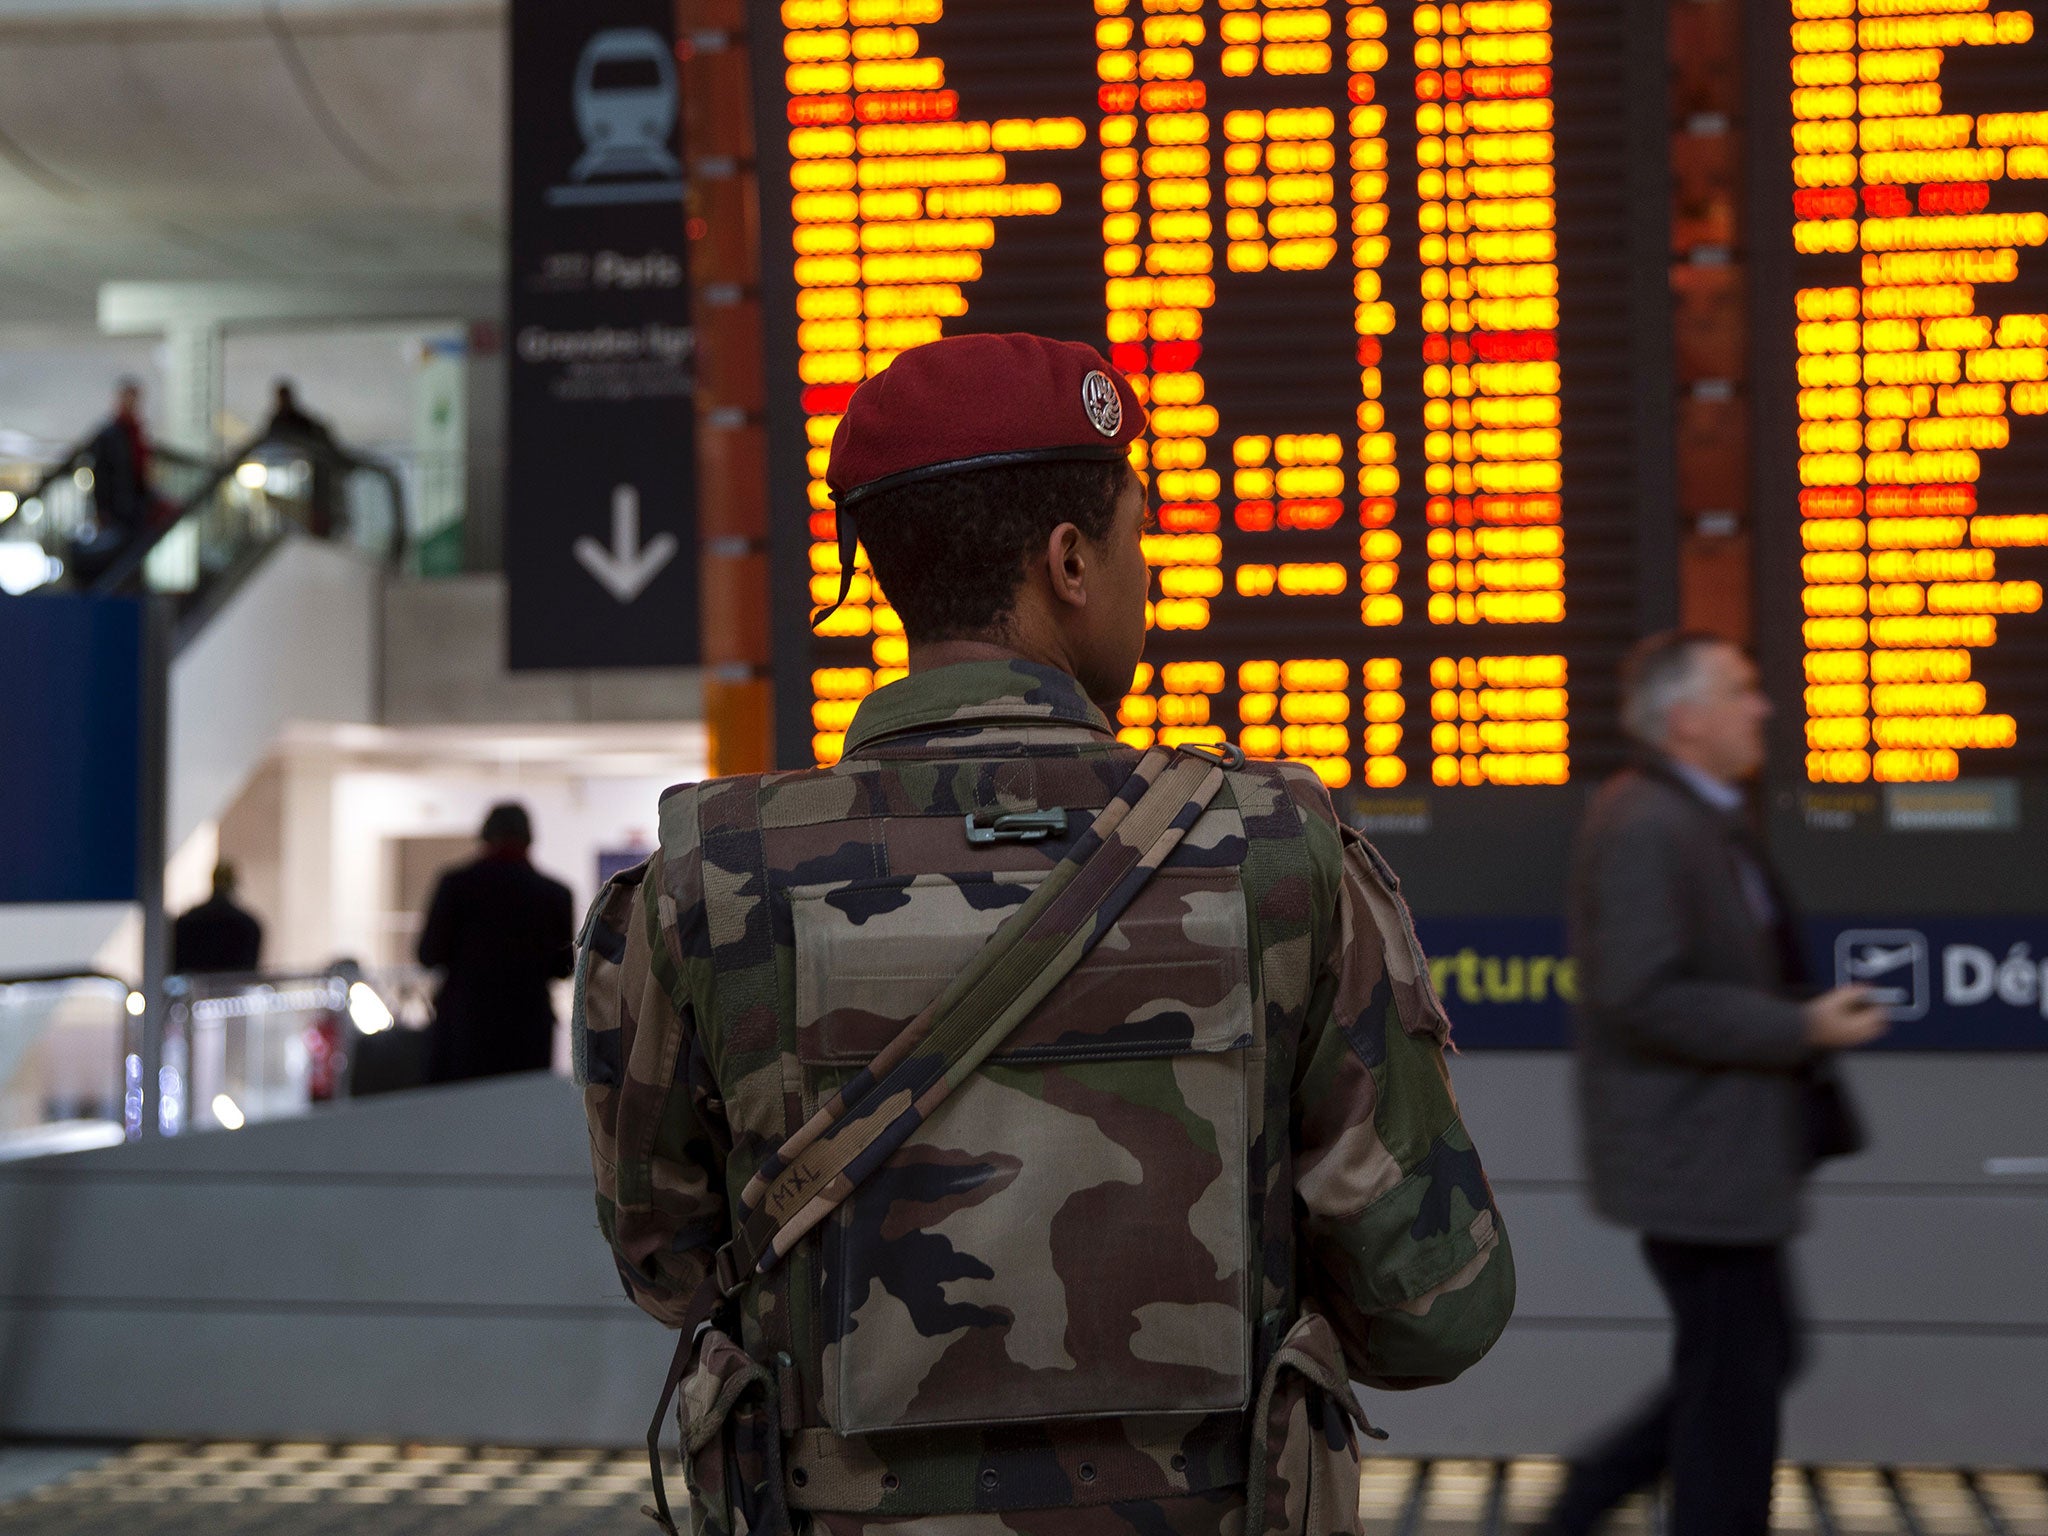 A French soldier patrols at the Charles de Gaulle airport amid heightened security levels on 3 December